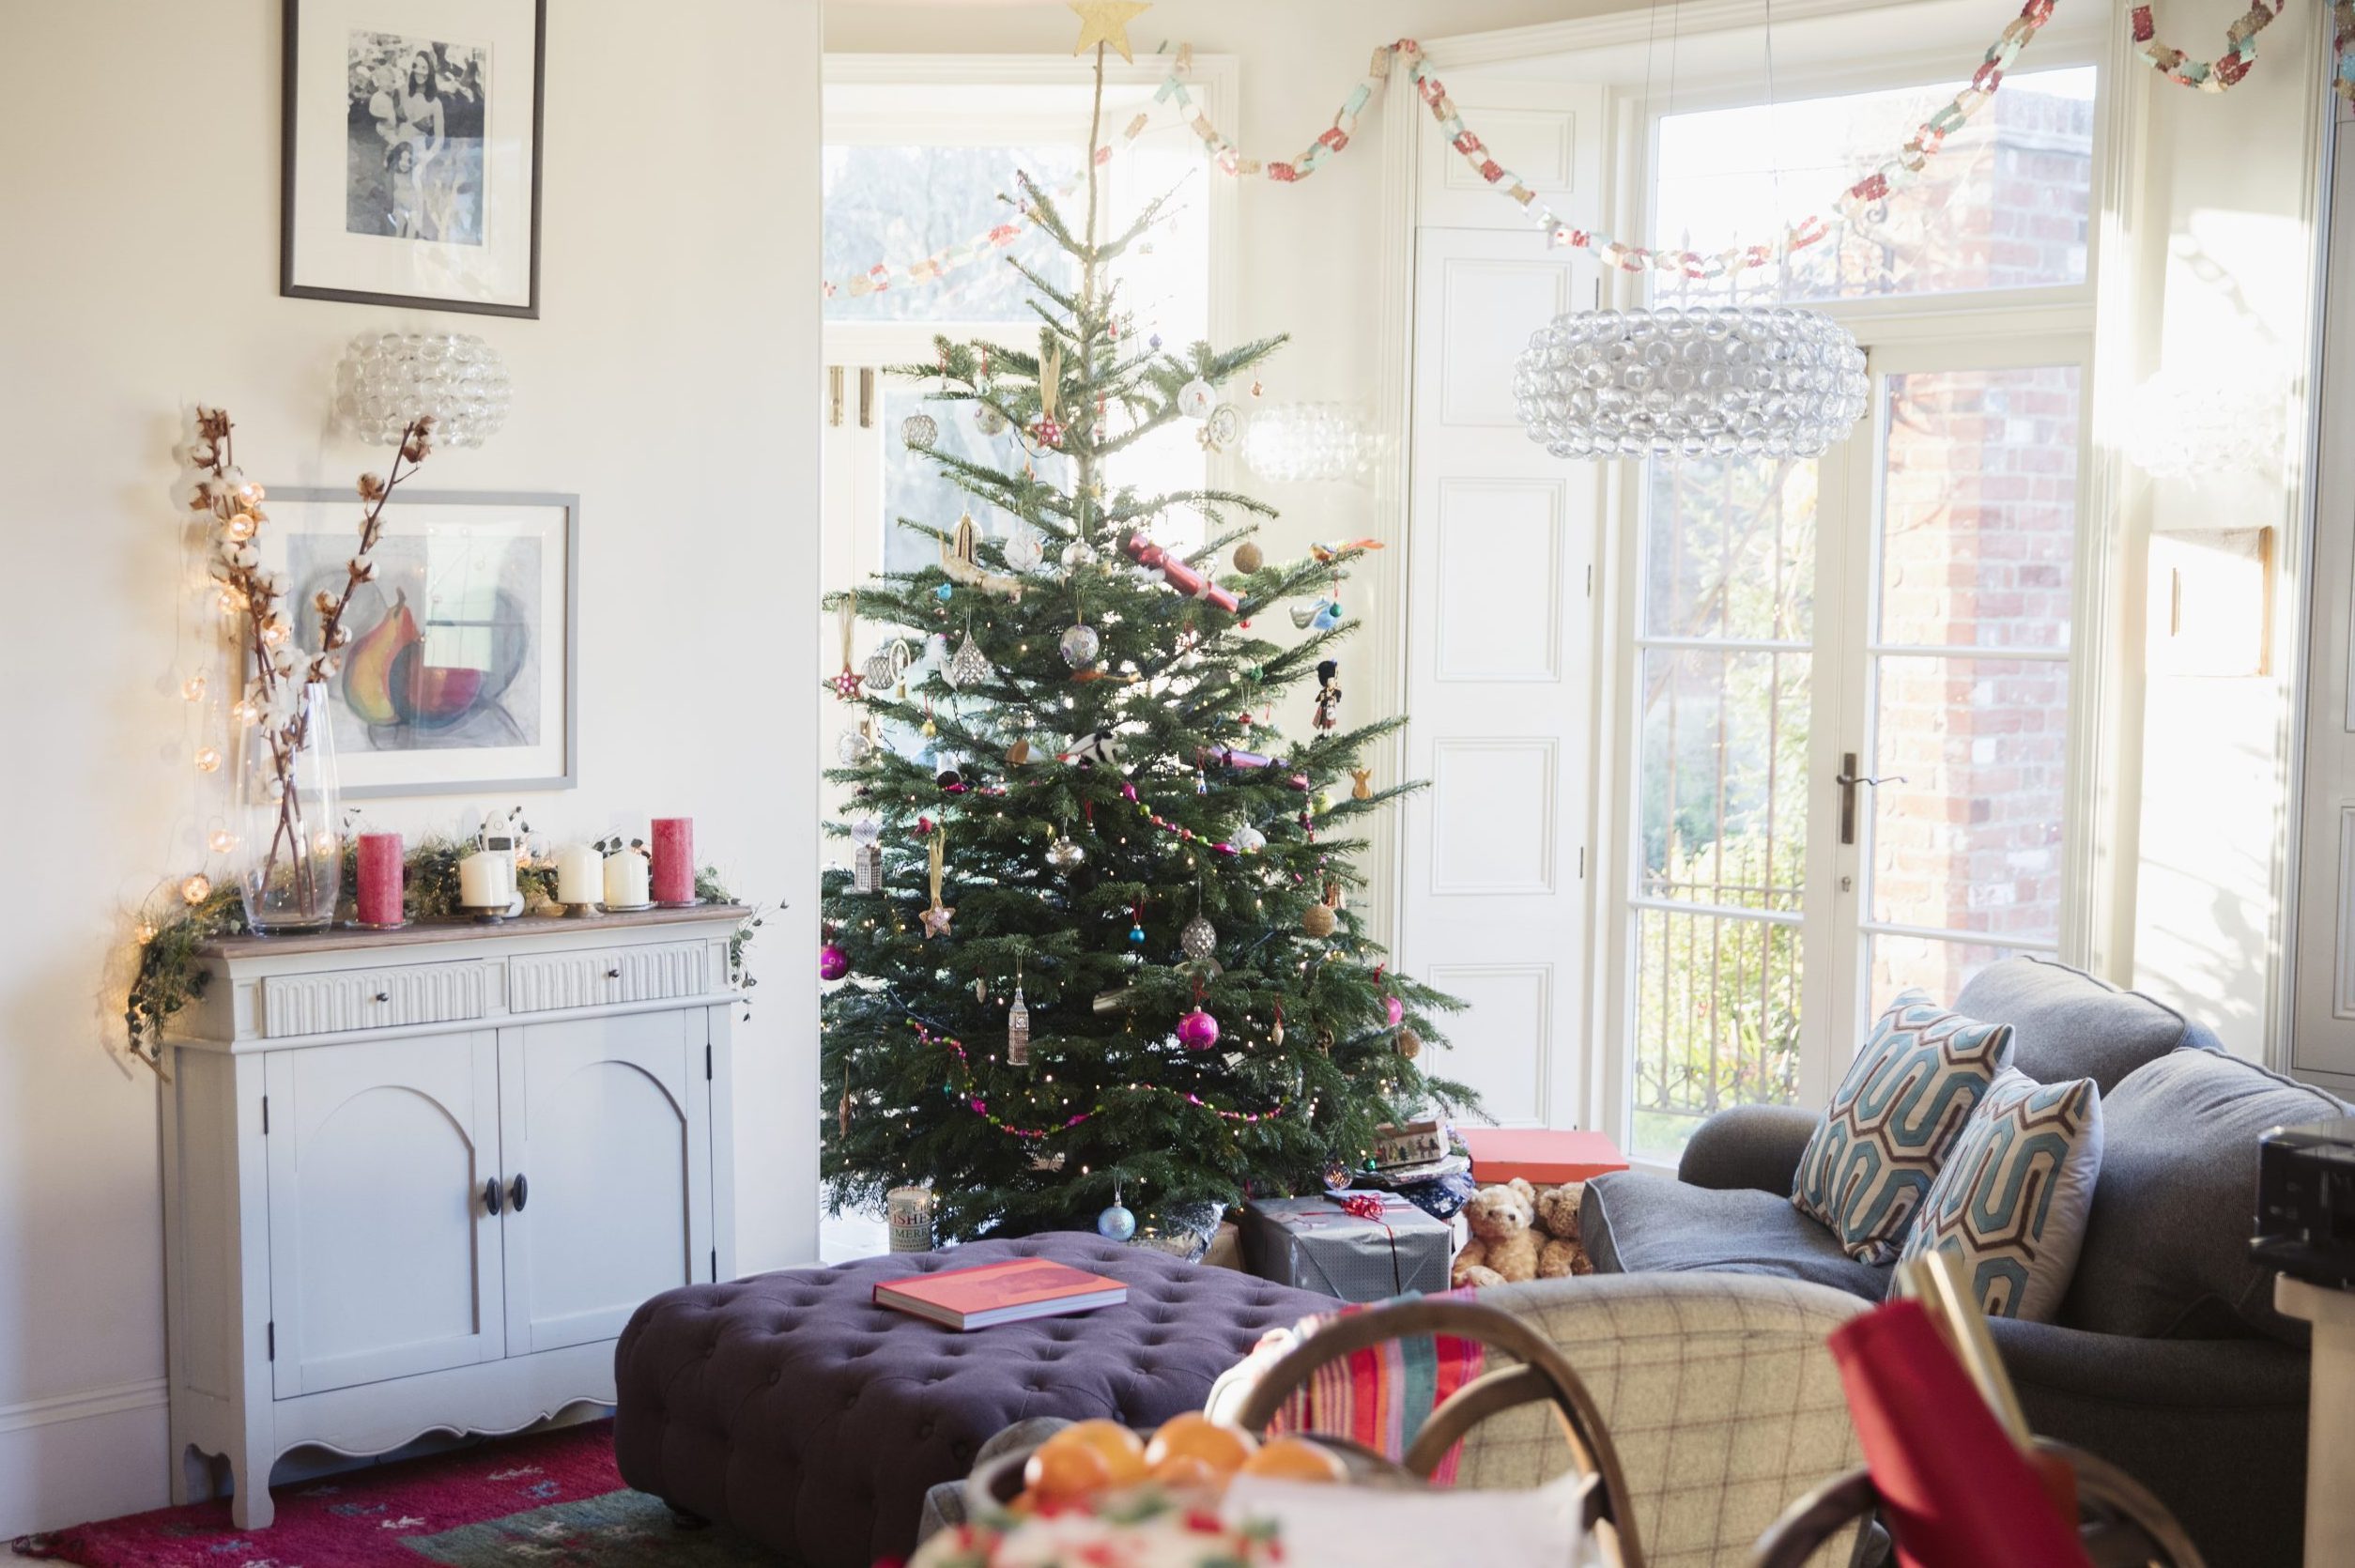 How To Decorate a Small Living Room for Christmas